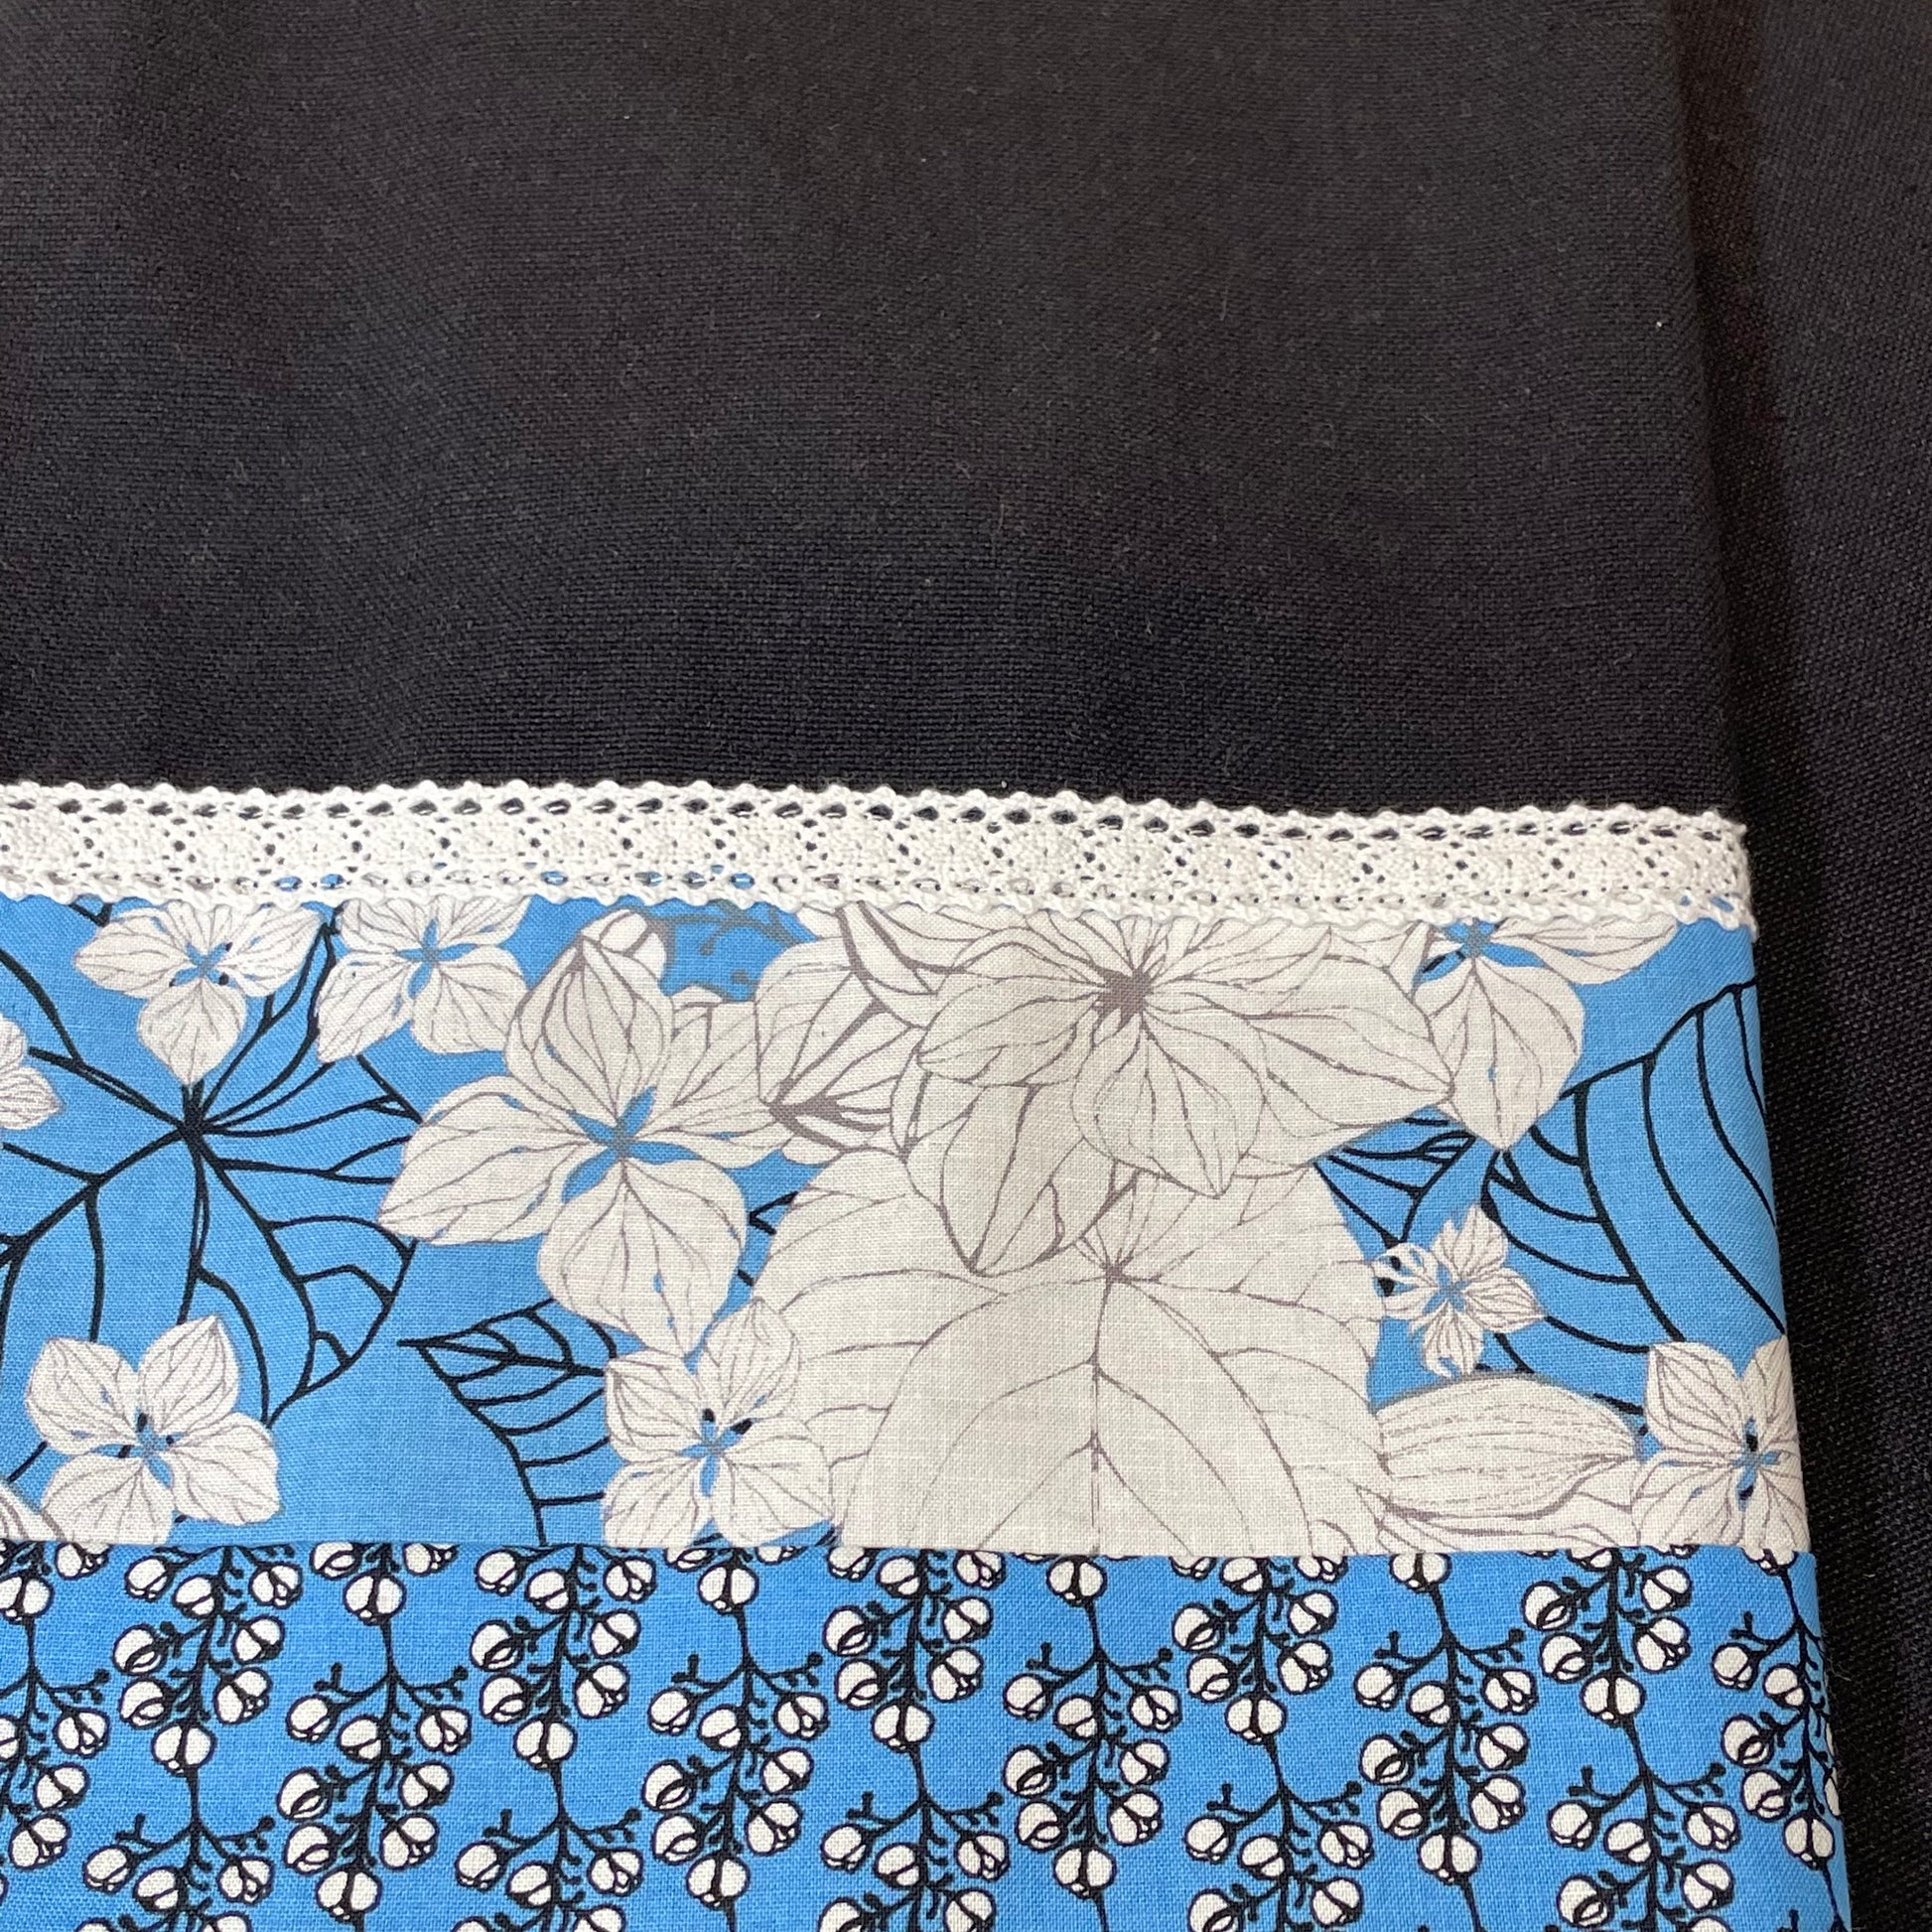 Blue and Black decorative dish towel for your kitchen.  Black toweling with blue and white flower cotton accent material.  White cotton lace trim.  Handcrafted by Home Stitchery Decor.  Find your favorite or watch tutorials on the Home Stitchery Decor YouTube Channel and make your own! 